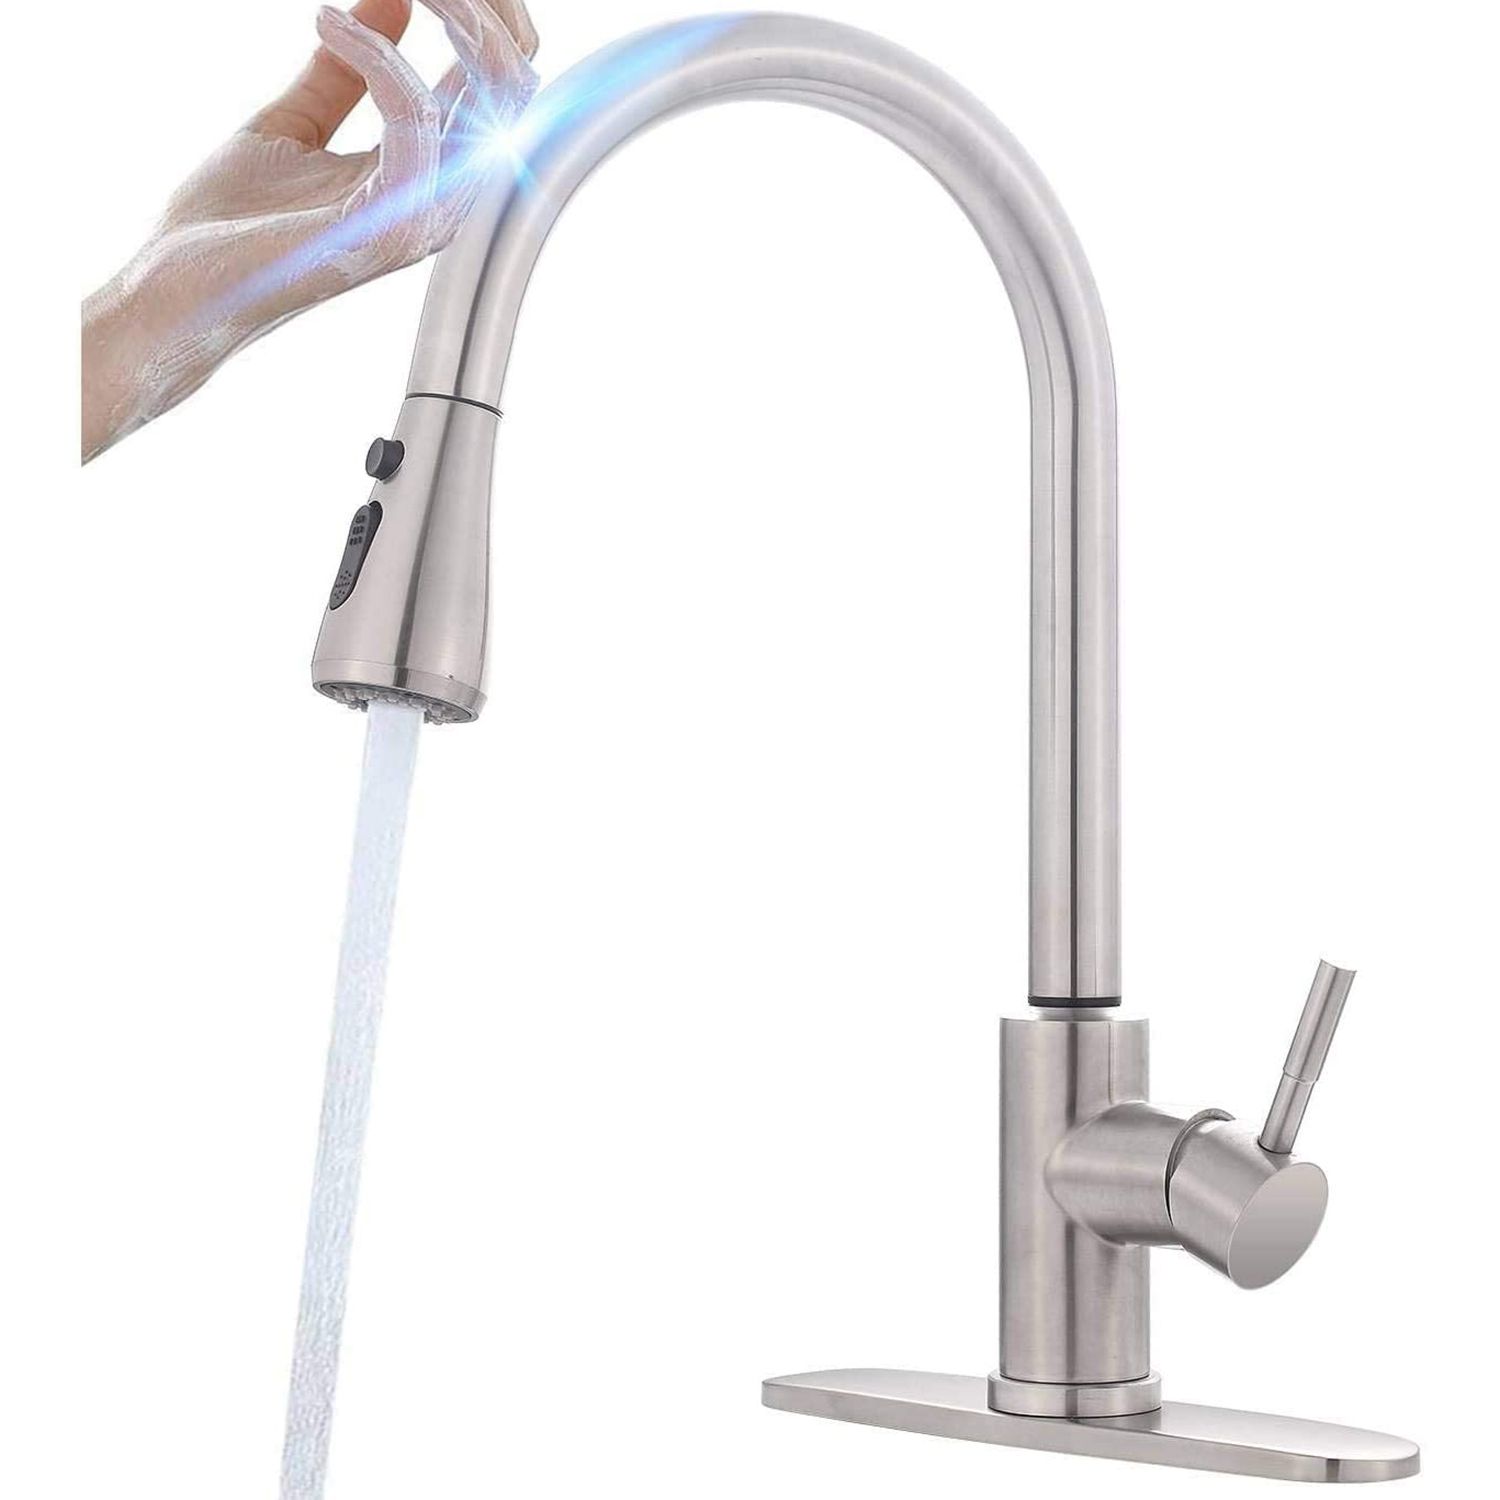 Mstjry's Touchless Kitchen Faucet Is on Sale at Amazon   Better ...